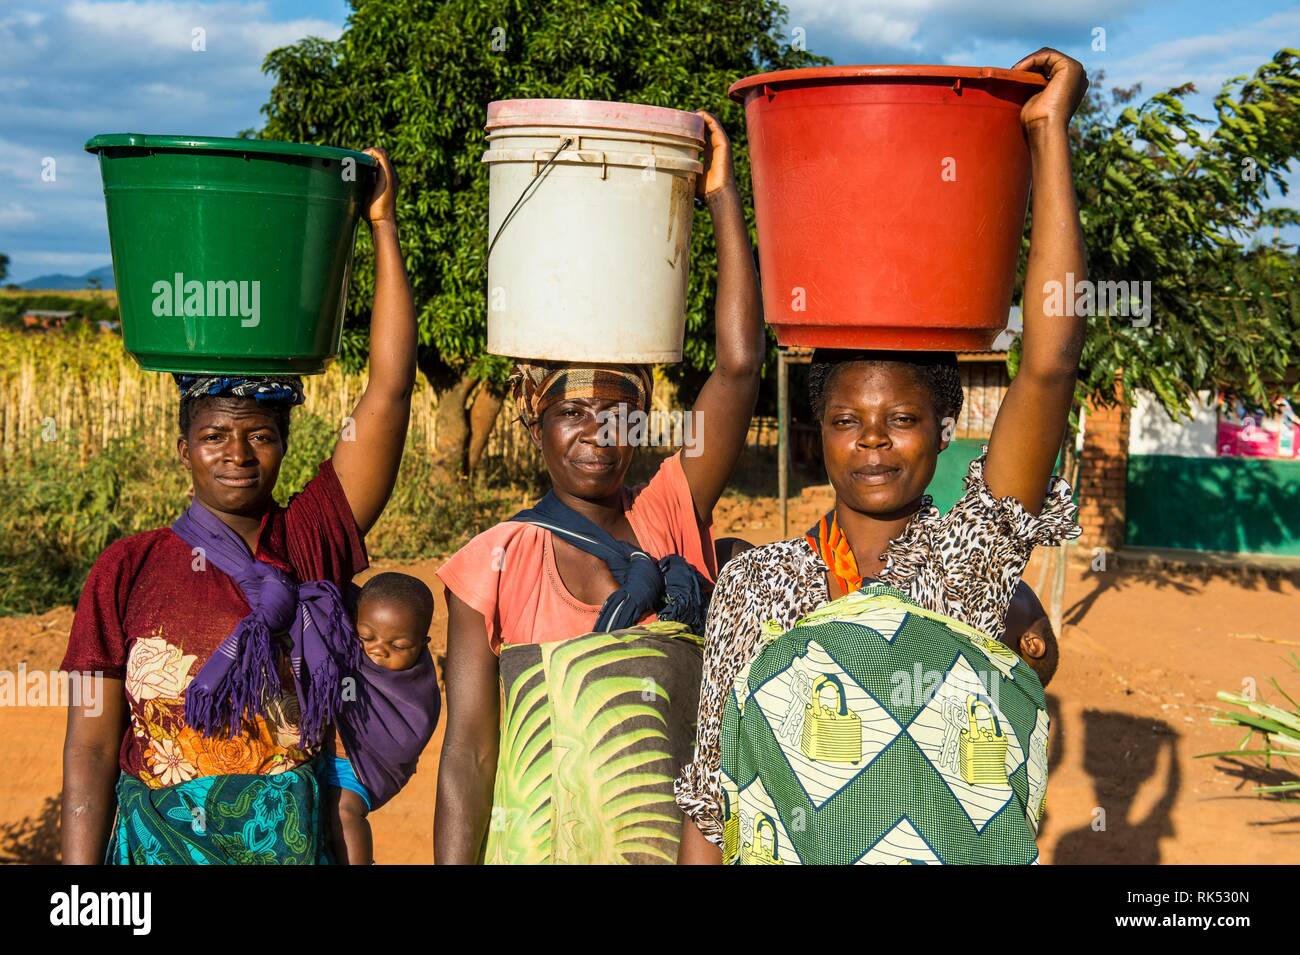 Local women carrying buckets on their head, Malawi, Africa Stock Photo